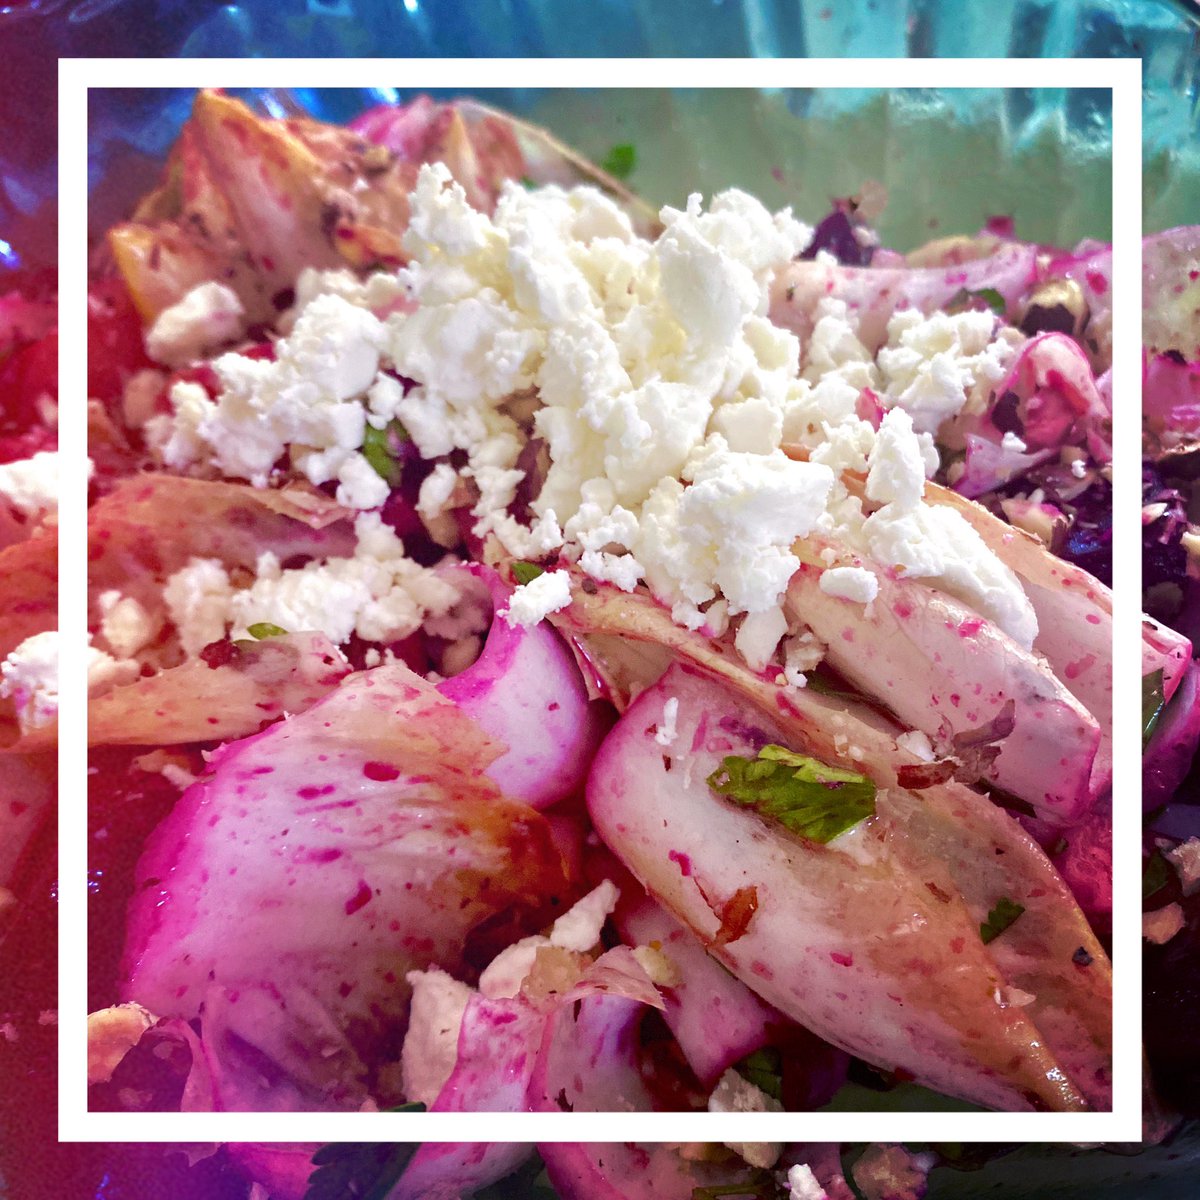 Thanks again to the Kitchen Shrink at @delmartimes , guiding me to healthy + tasty eating during #coronavirus⠀
Beets and endives swimming in hazelnuts (chopped + oil), aged sherry vinegar, Meyer lemon. A touch of honey + Dijon. Feta + parsley on top.